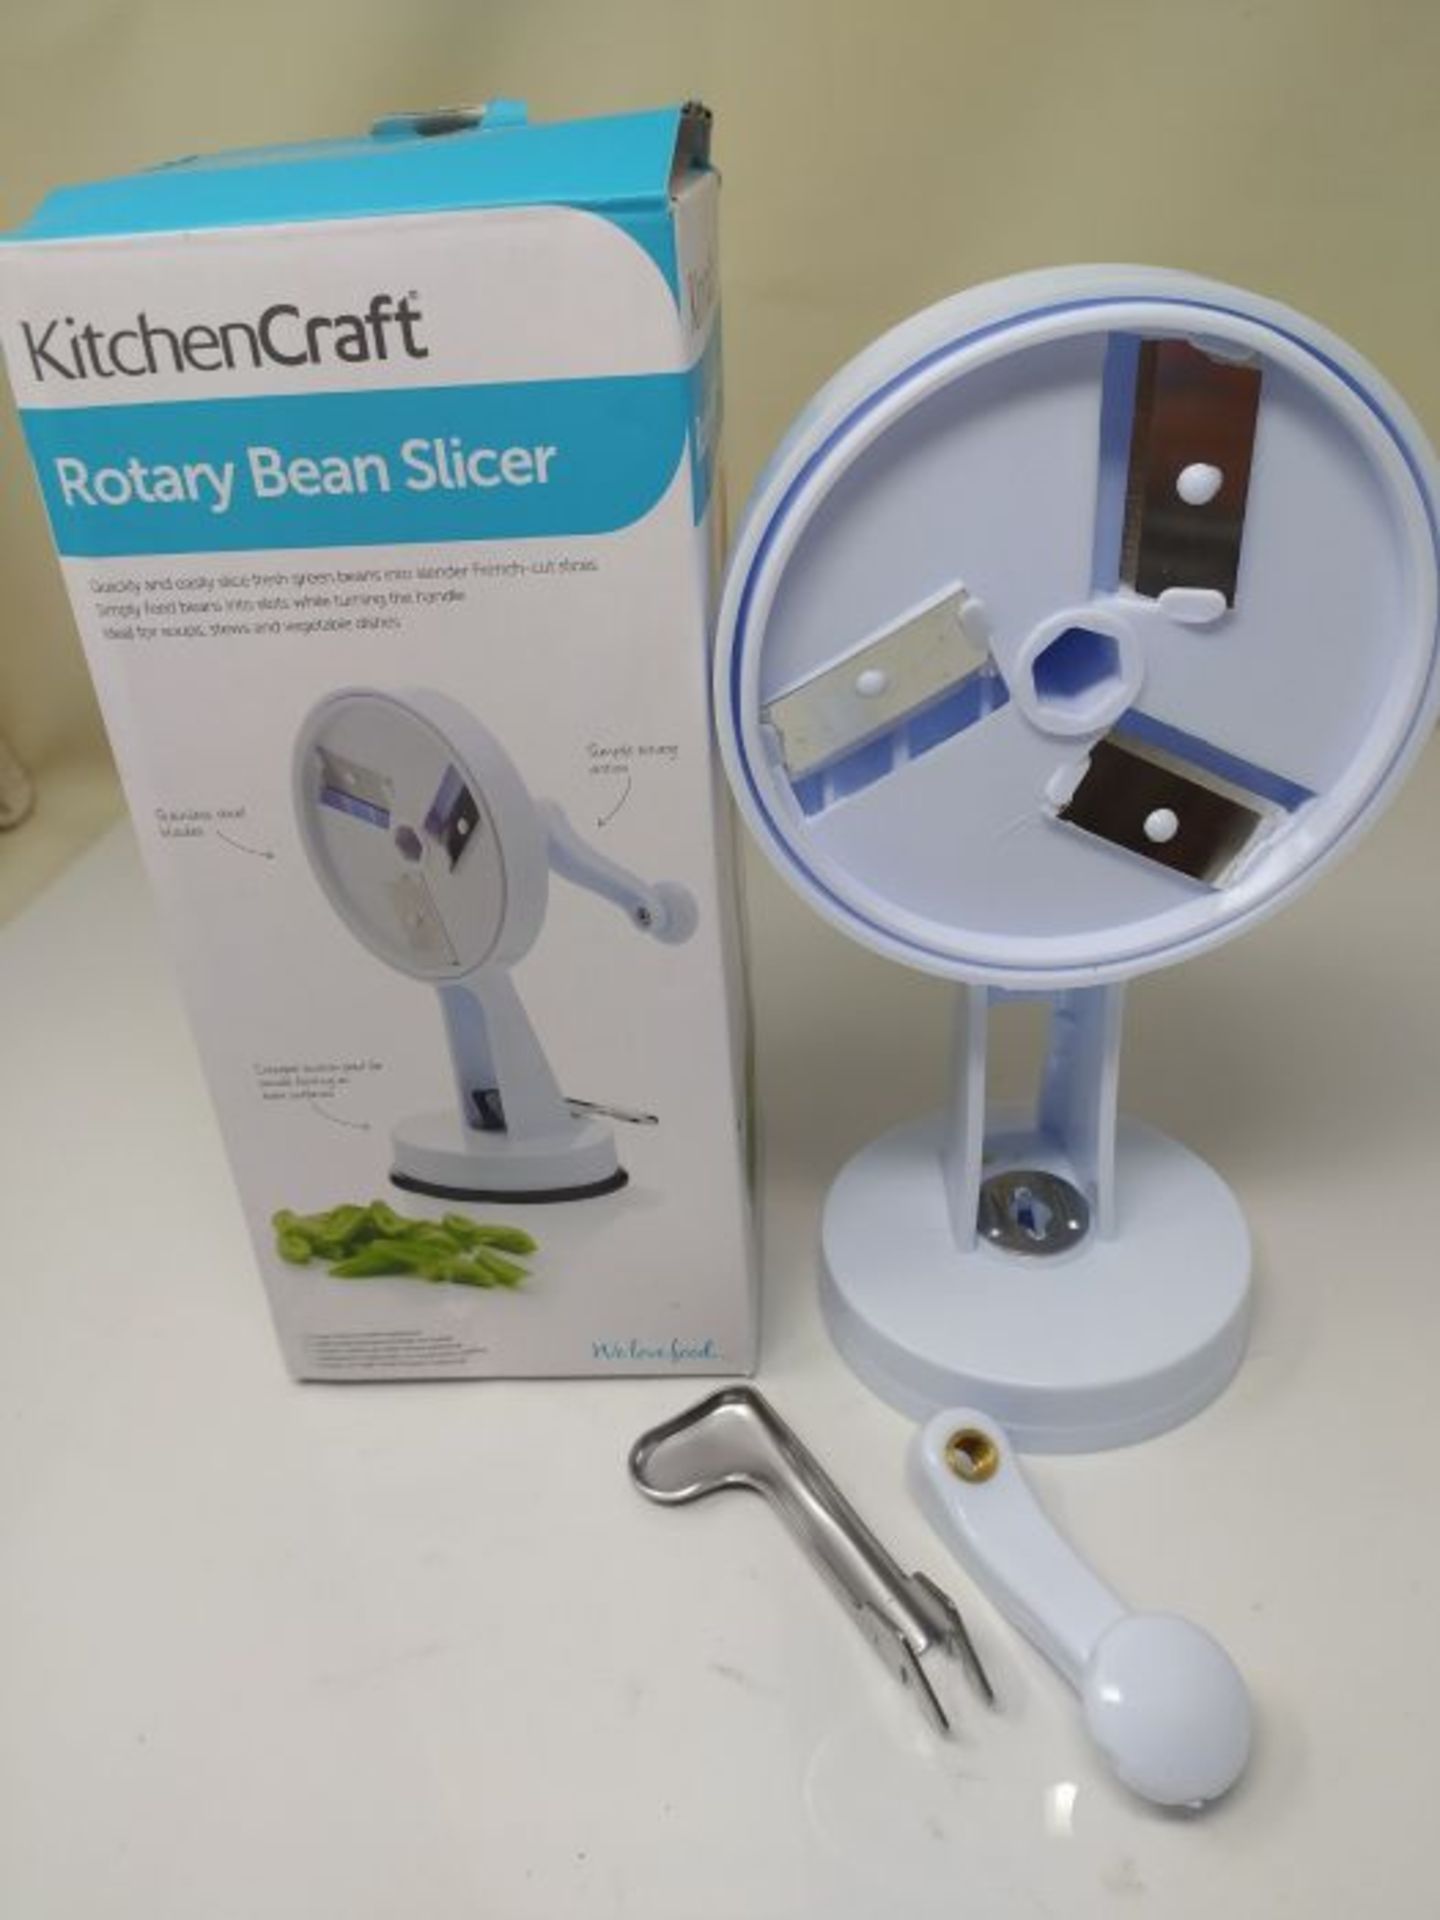 [INCOMPLETE] KitchenCraft KCBEANAUTO Rotary Runner Bean Slicer with Suction Pad in Gif - Image 2 of 2